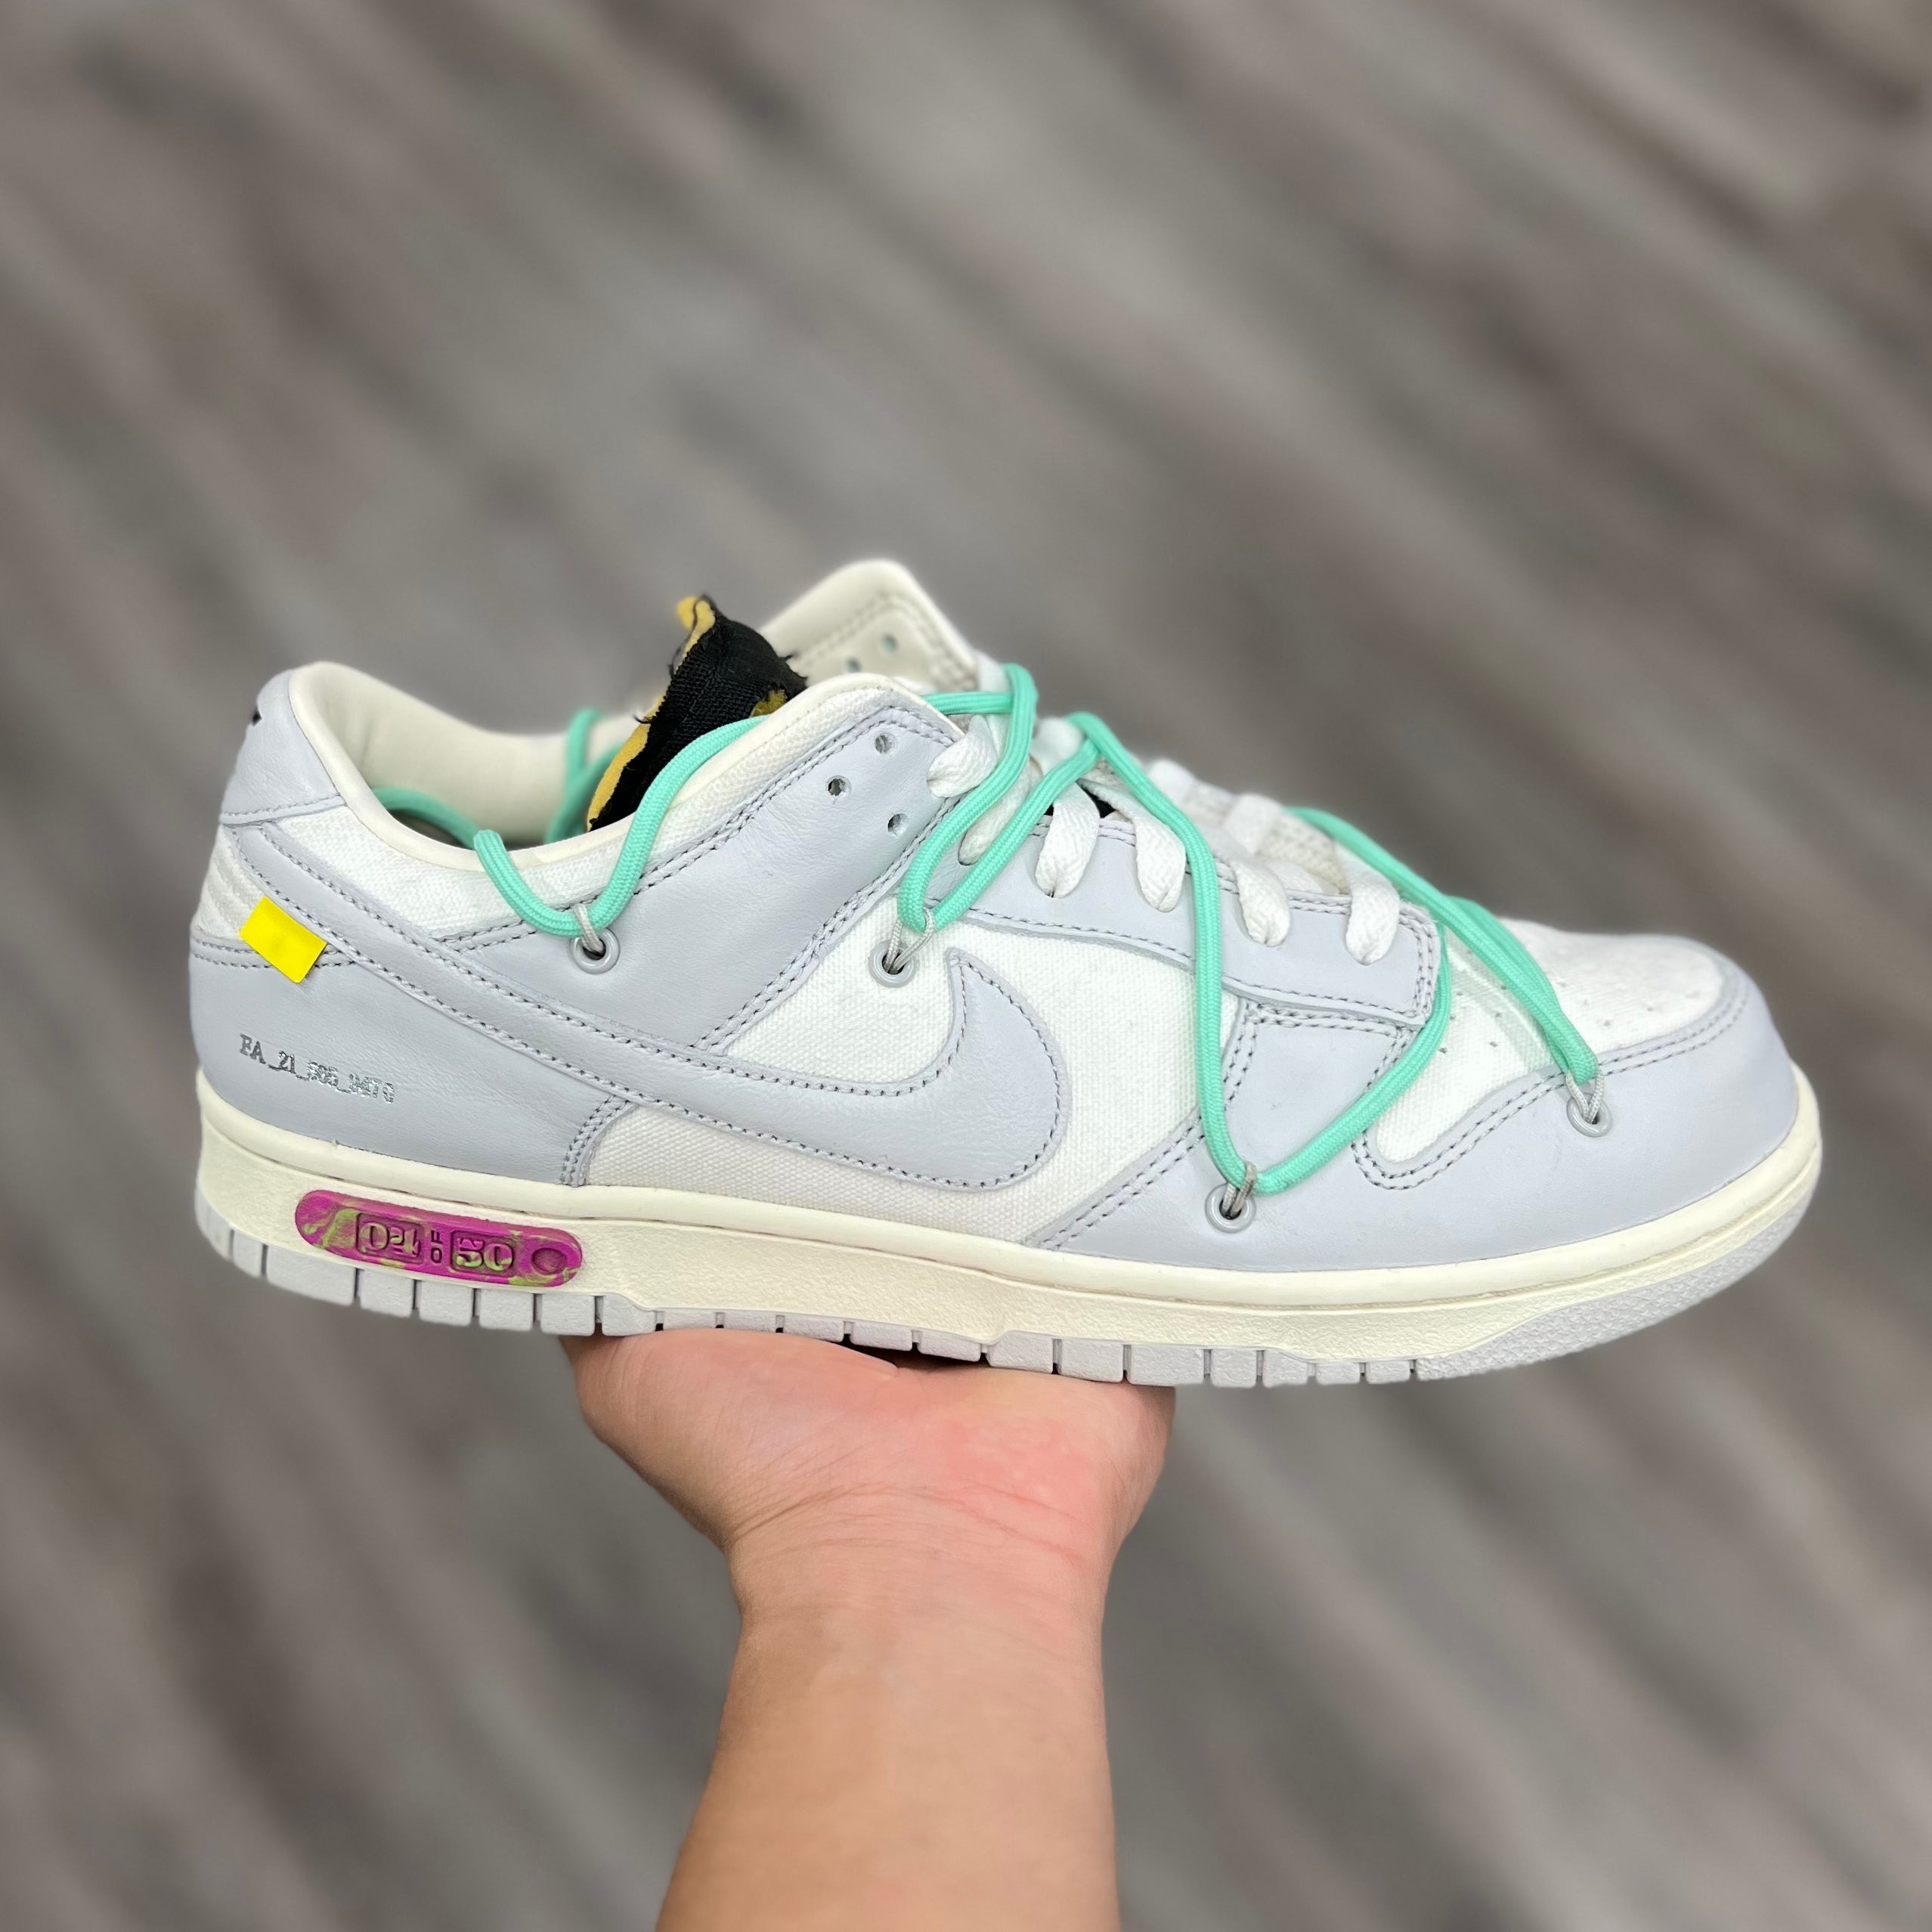 Nike Dunk Low “Off White Lot 4”